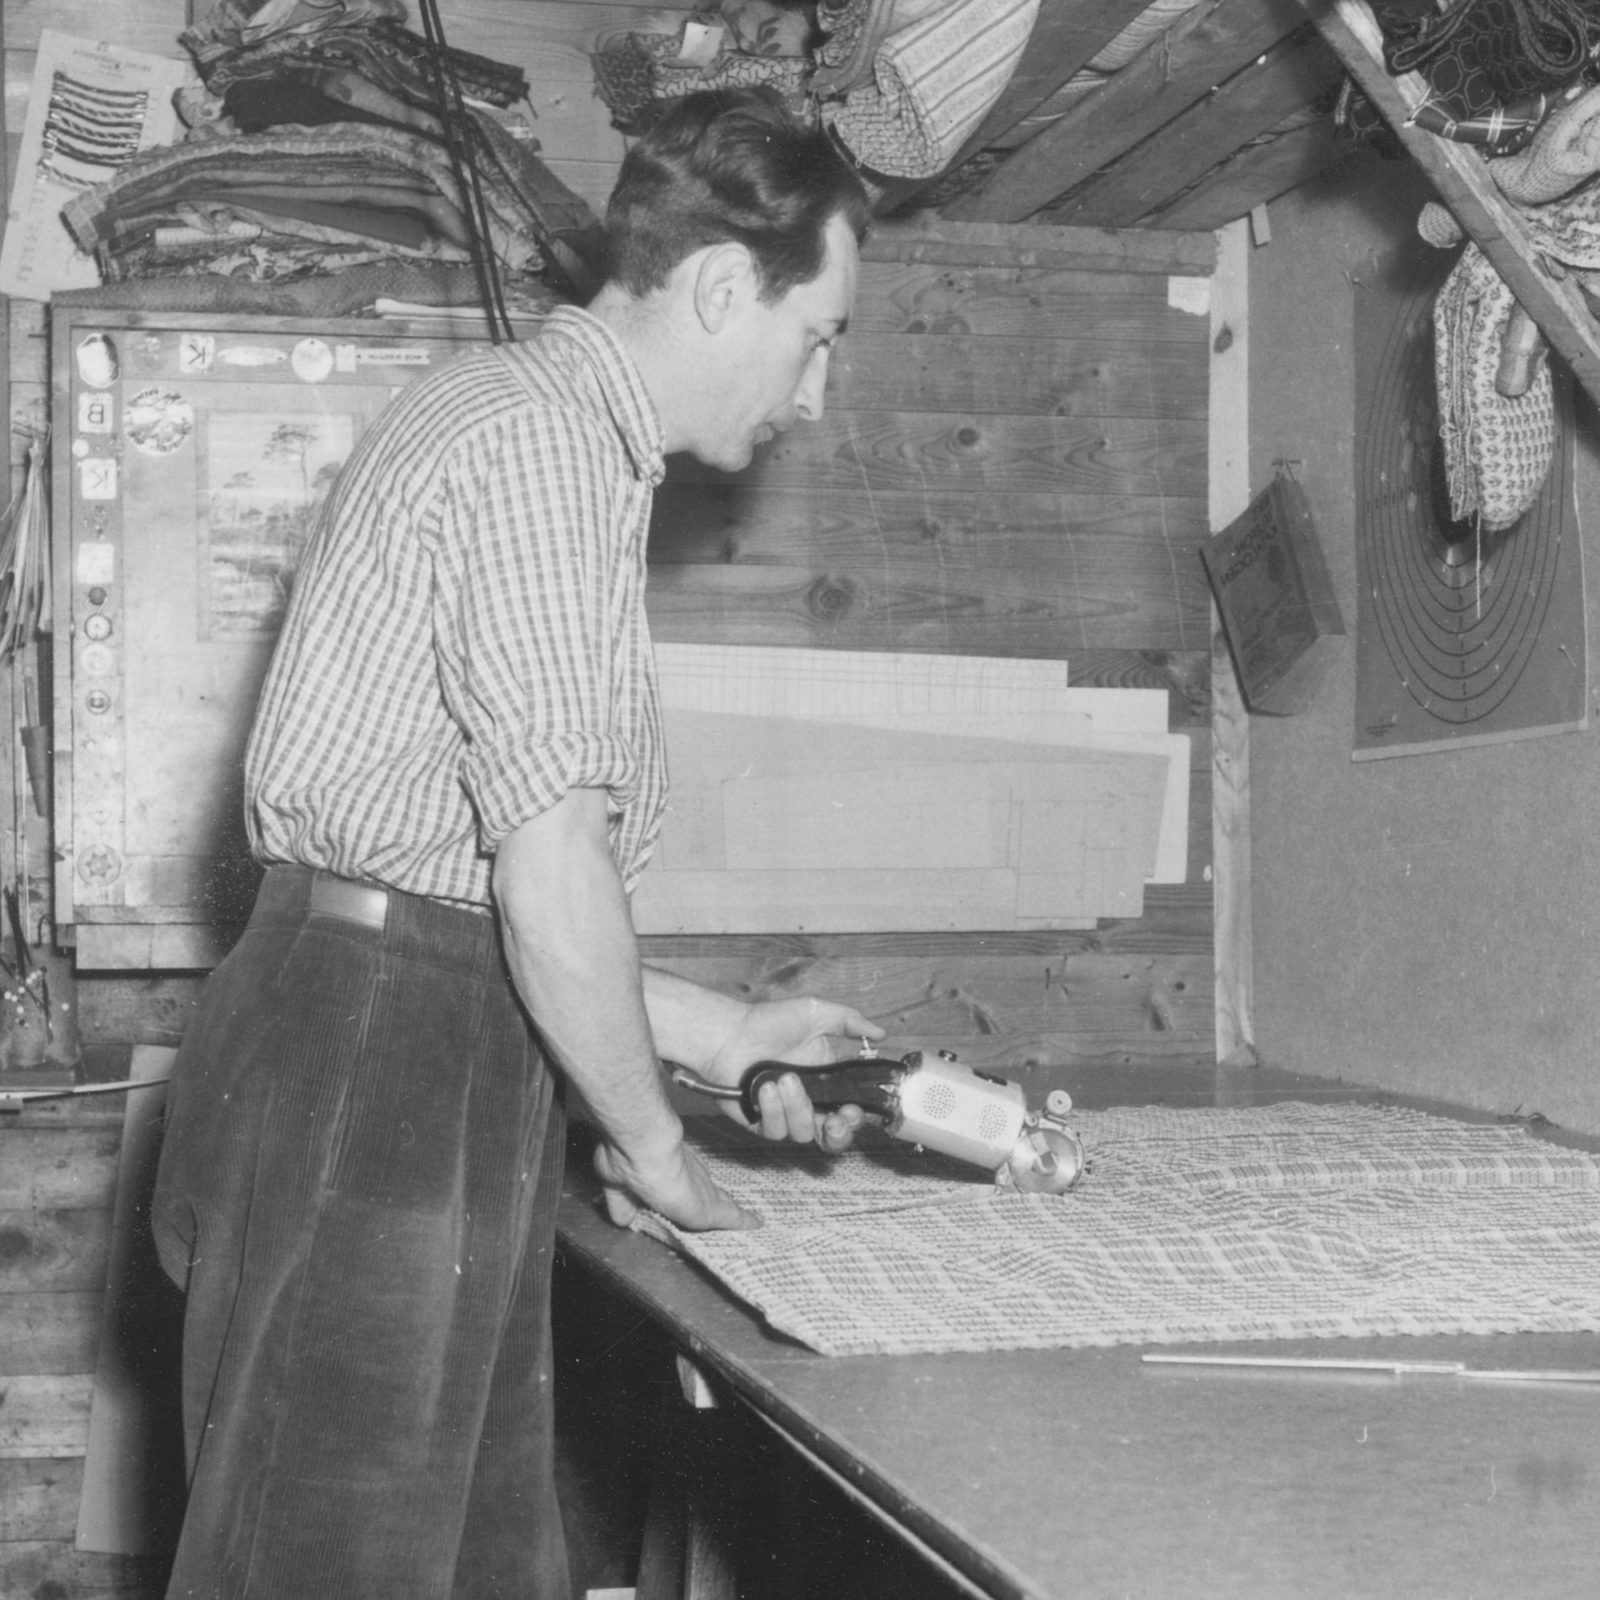 Man cutting fabric with rotary cutter, 1940s.